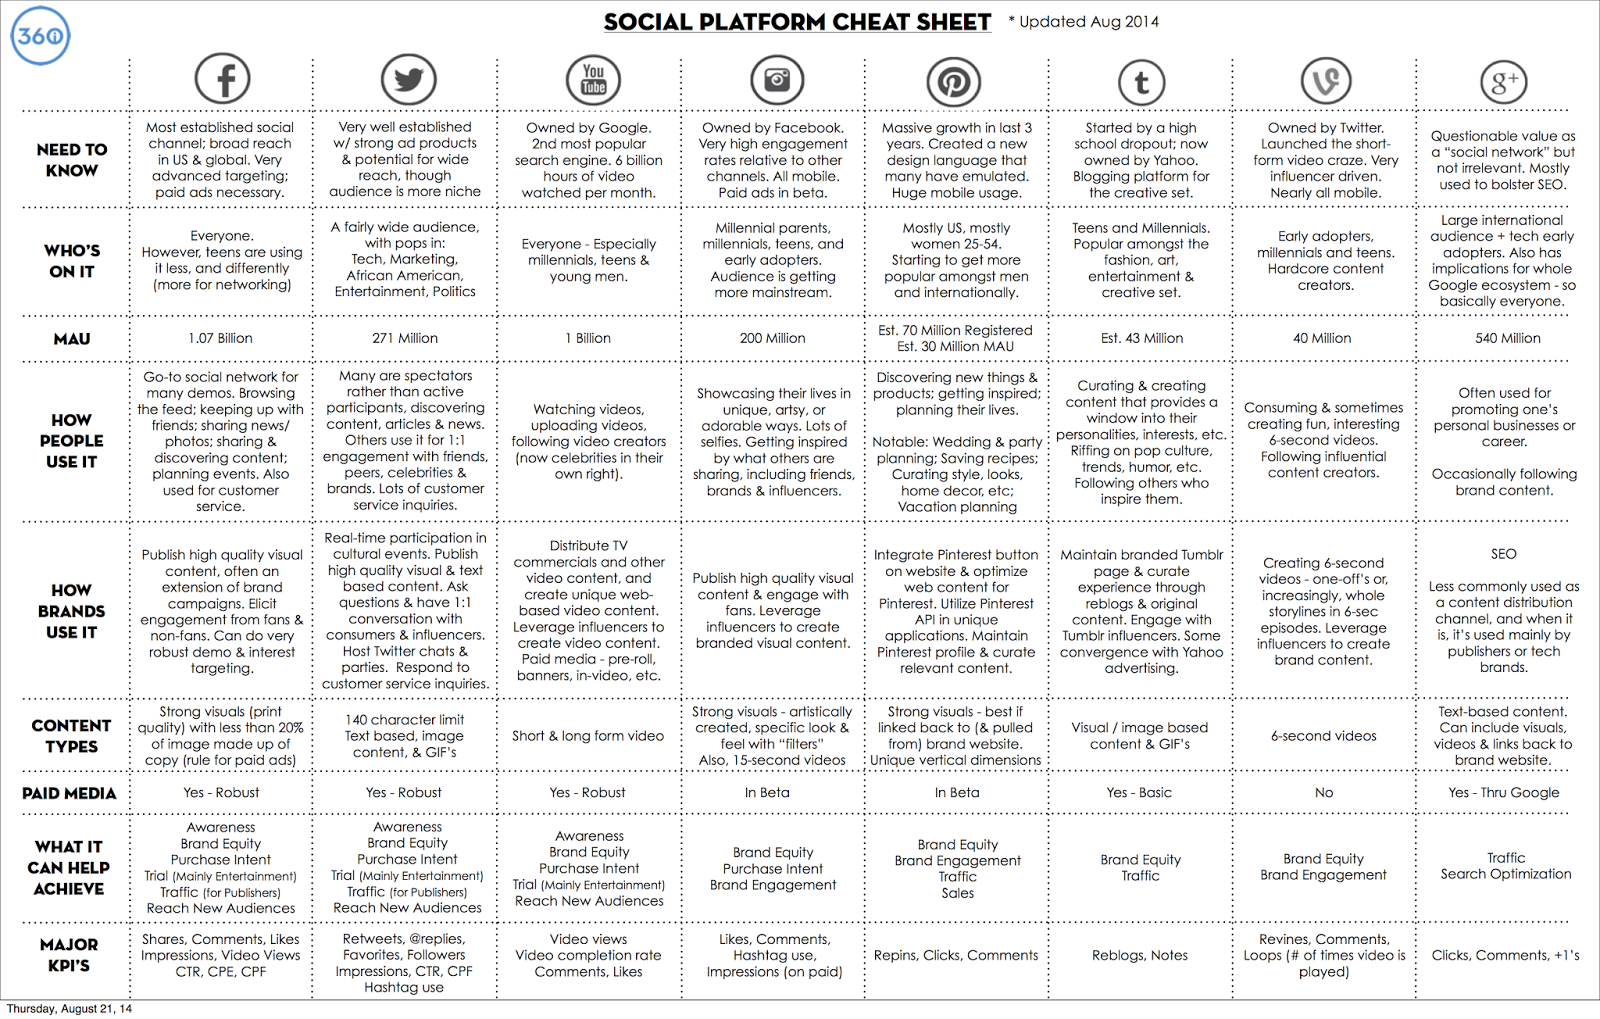 Social Media Cheat Sheet: A Marketer’s Guide to 8 Top Platforms